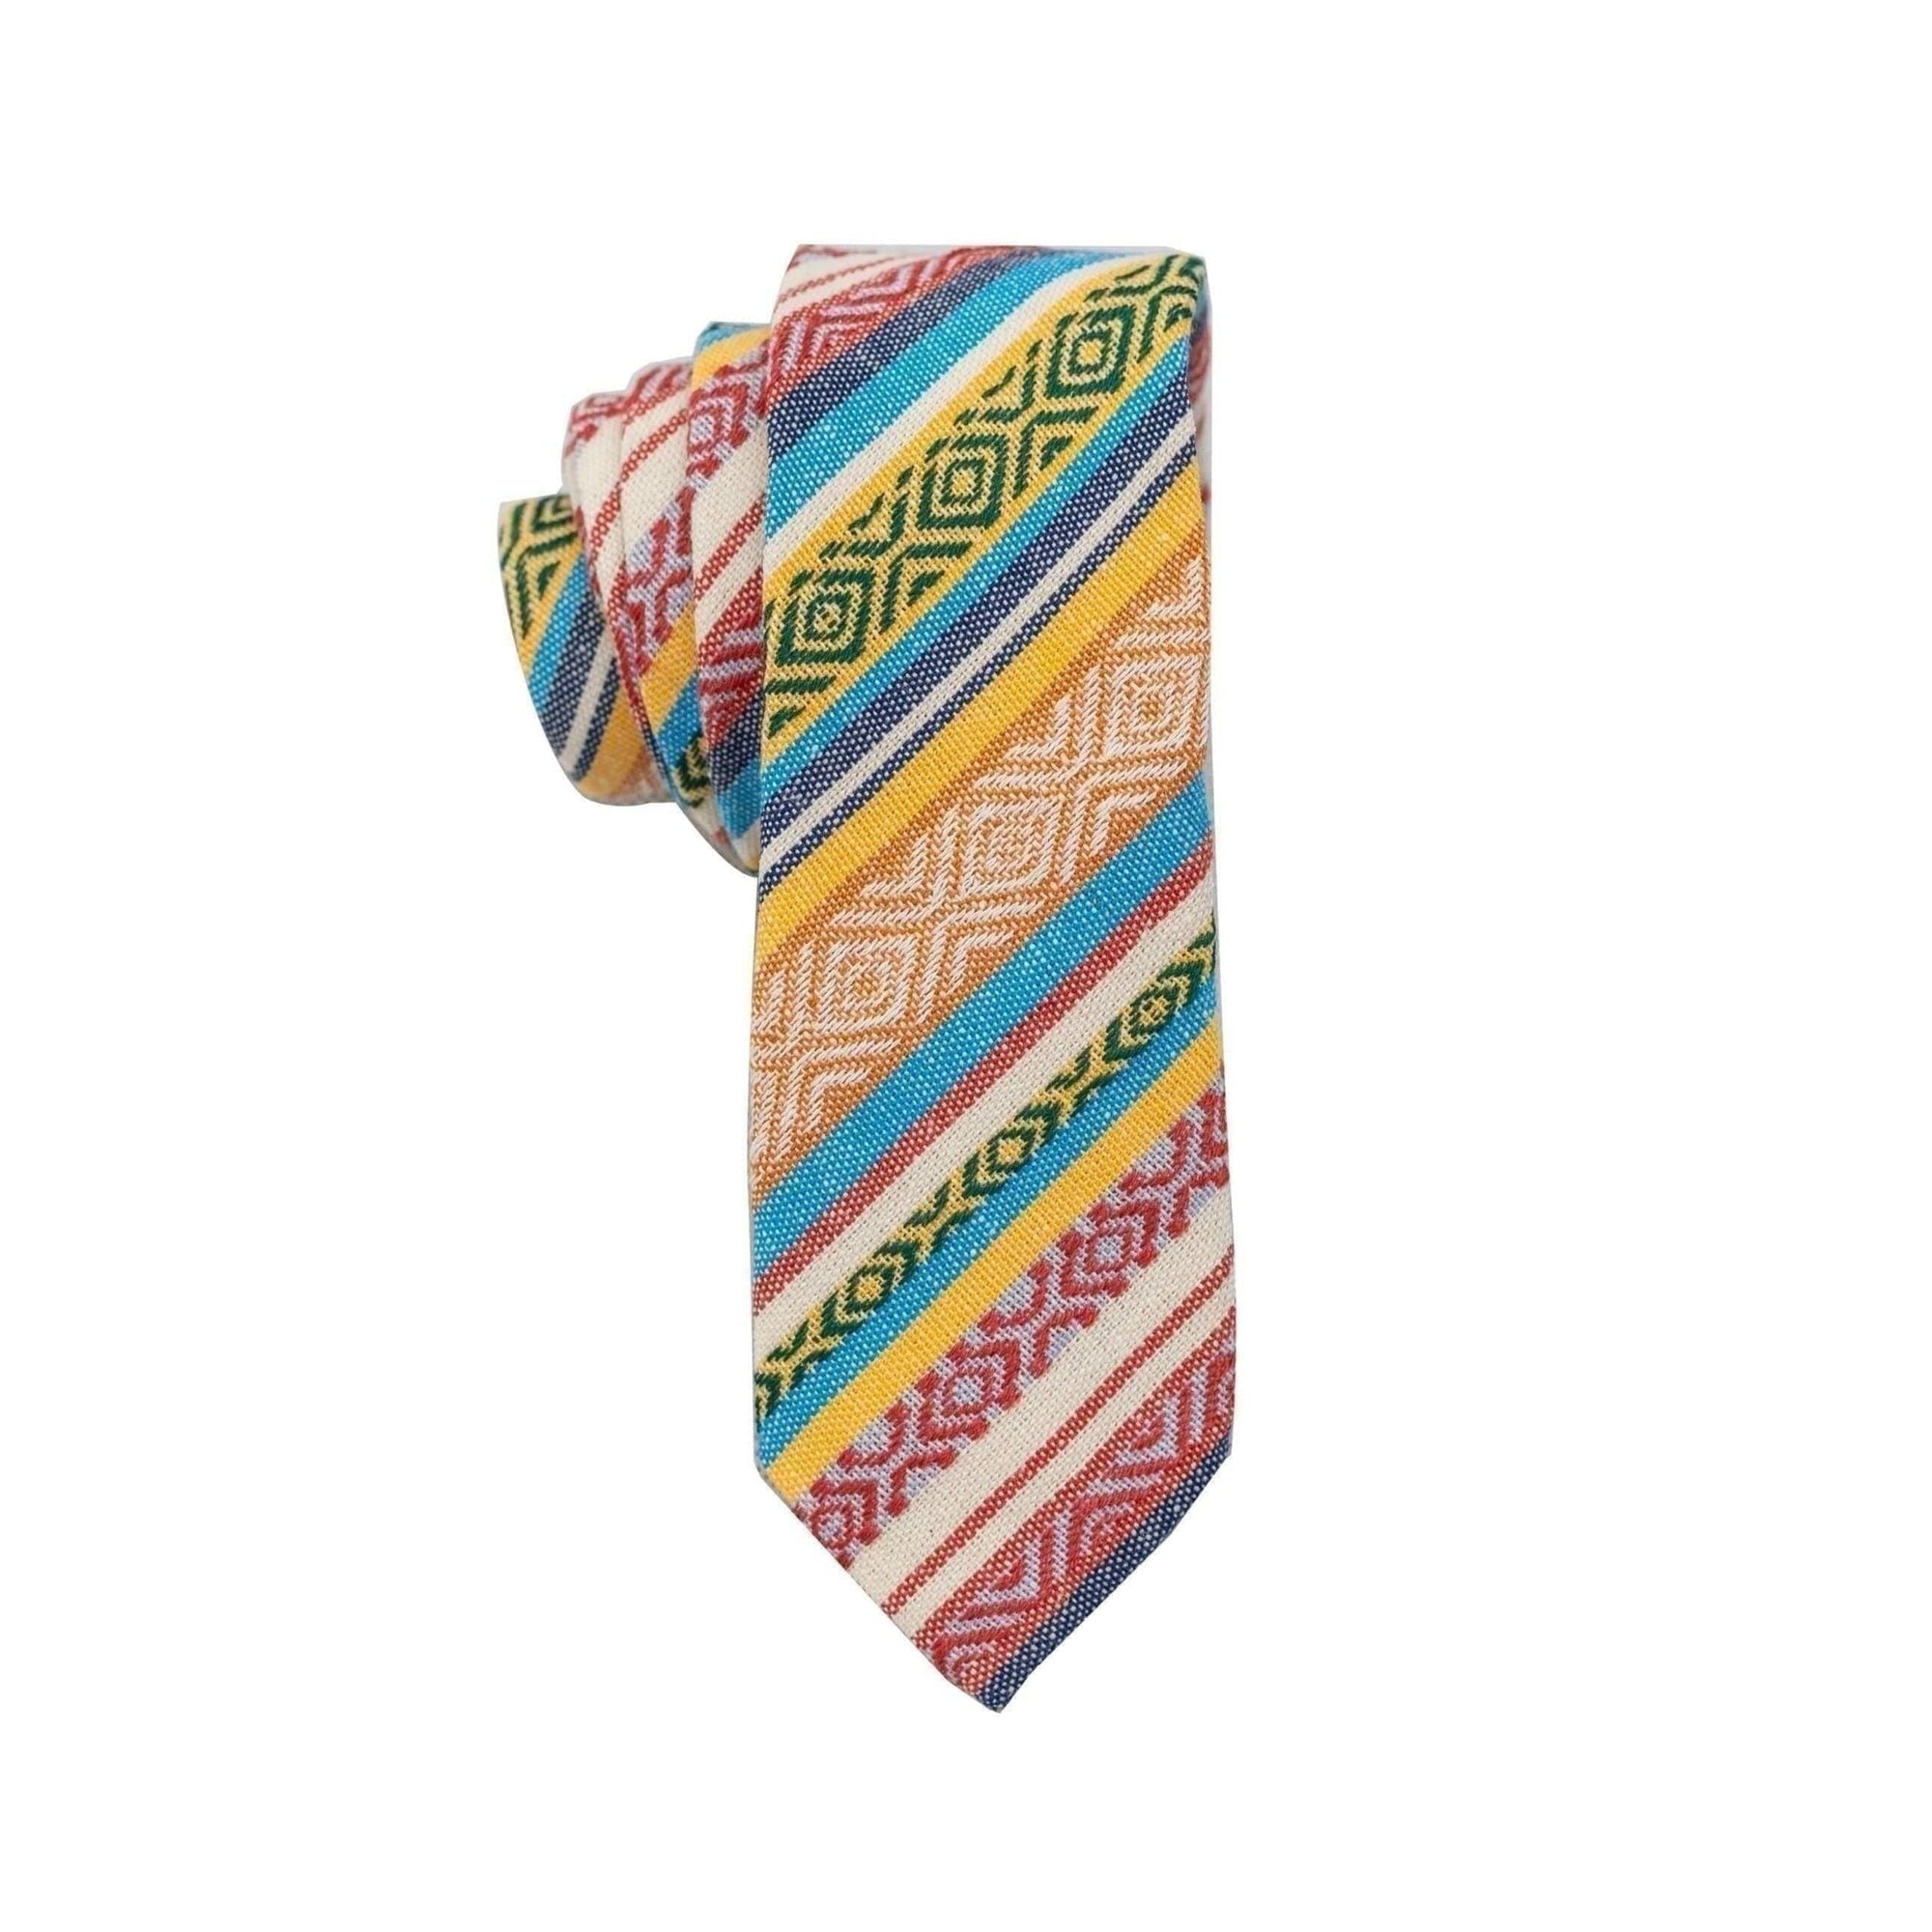 Geometric Print Skinny Tie Yellow Aztec Print Skinny Tie 2.36”Mytieshop - ARIZONA-Neckties-Geometric Print Skinny Tie Floral Necktie for weddings and events great for prom and gifts Mens ties near me us tie shops cool skinny slim flower-Mytieshop. Skinny ties for weddings anniversaries. Father of bride. Groomsmen. Cool skinny neckties for men. Neckwear for prom, missions and fancy events. Gift ideas for men. Anniversaries ideas. Wedding aesthetics. Flower ties. Dry flower ties.